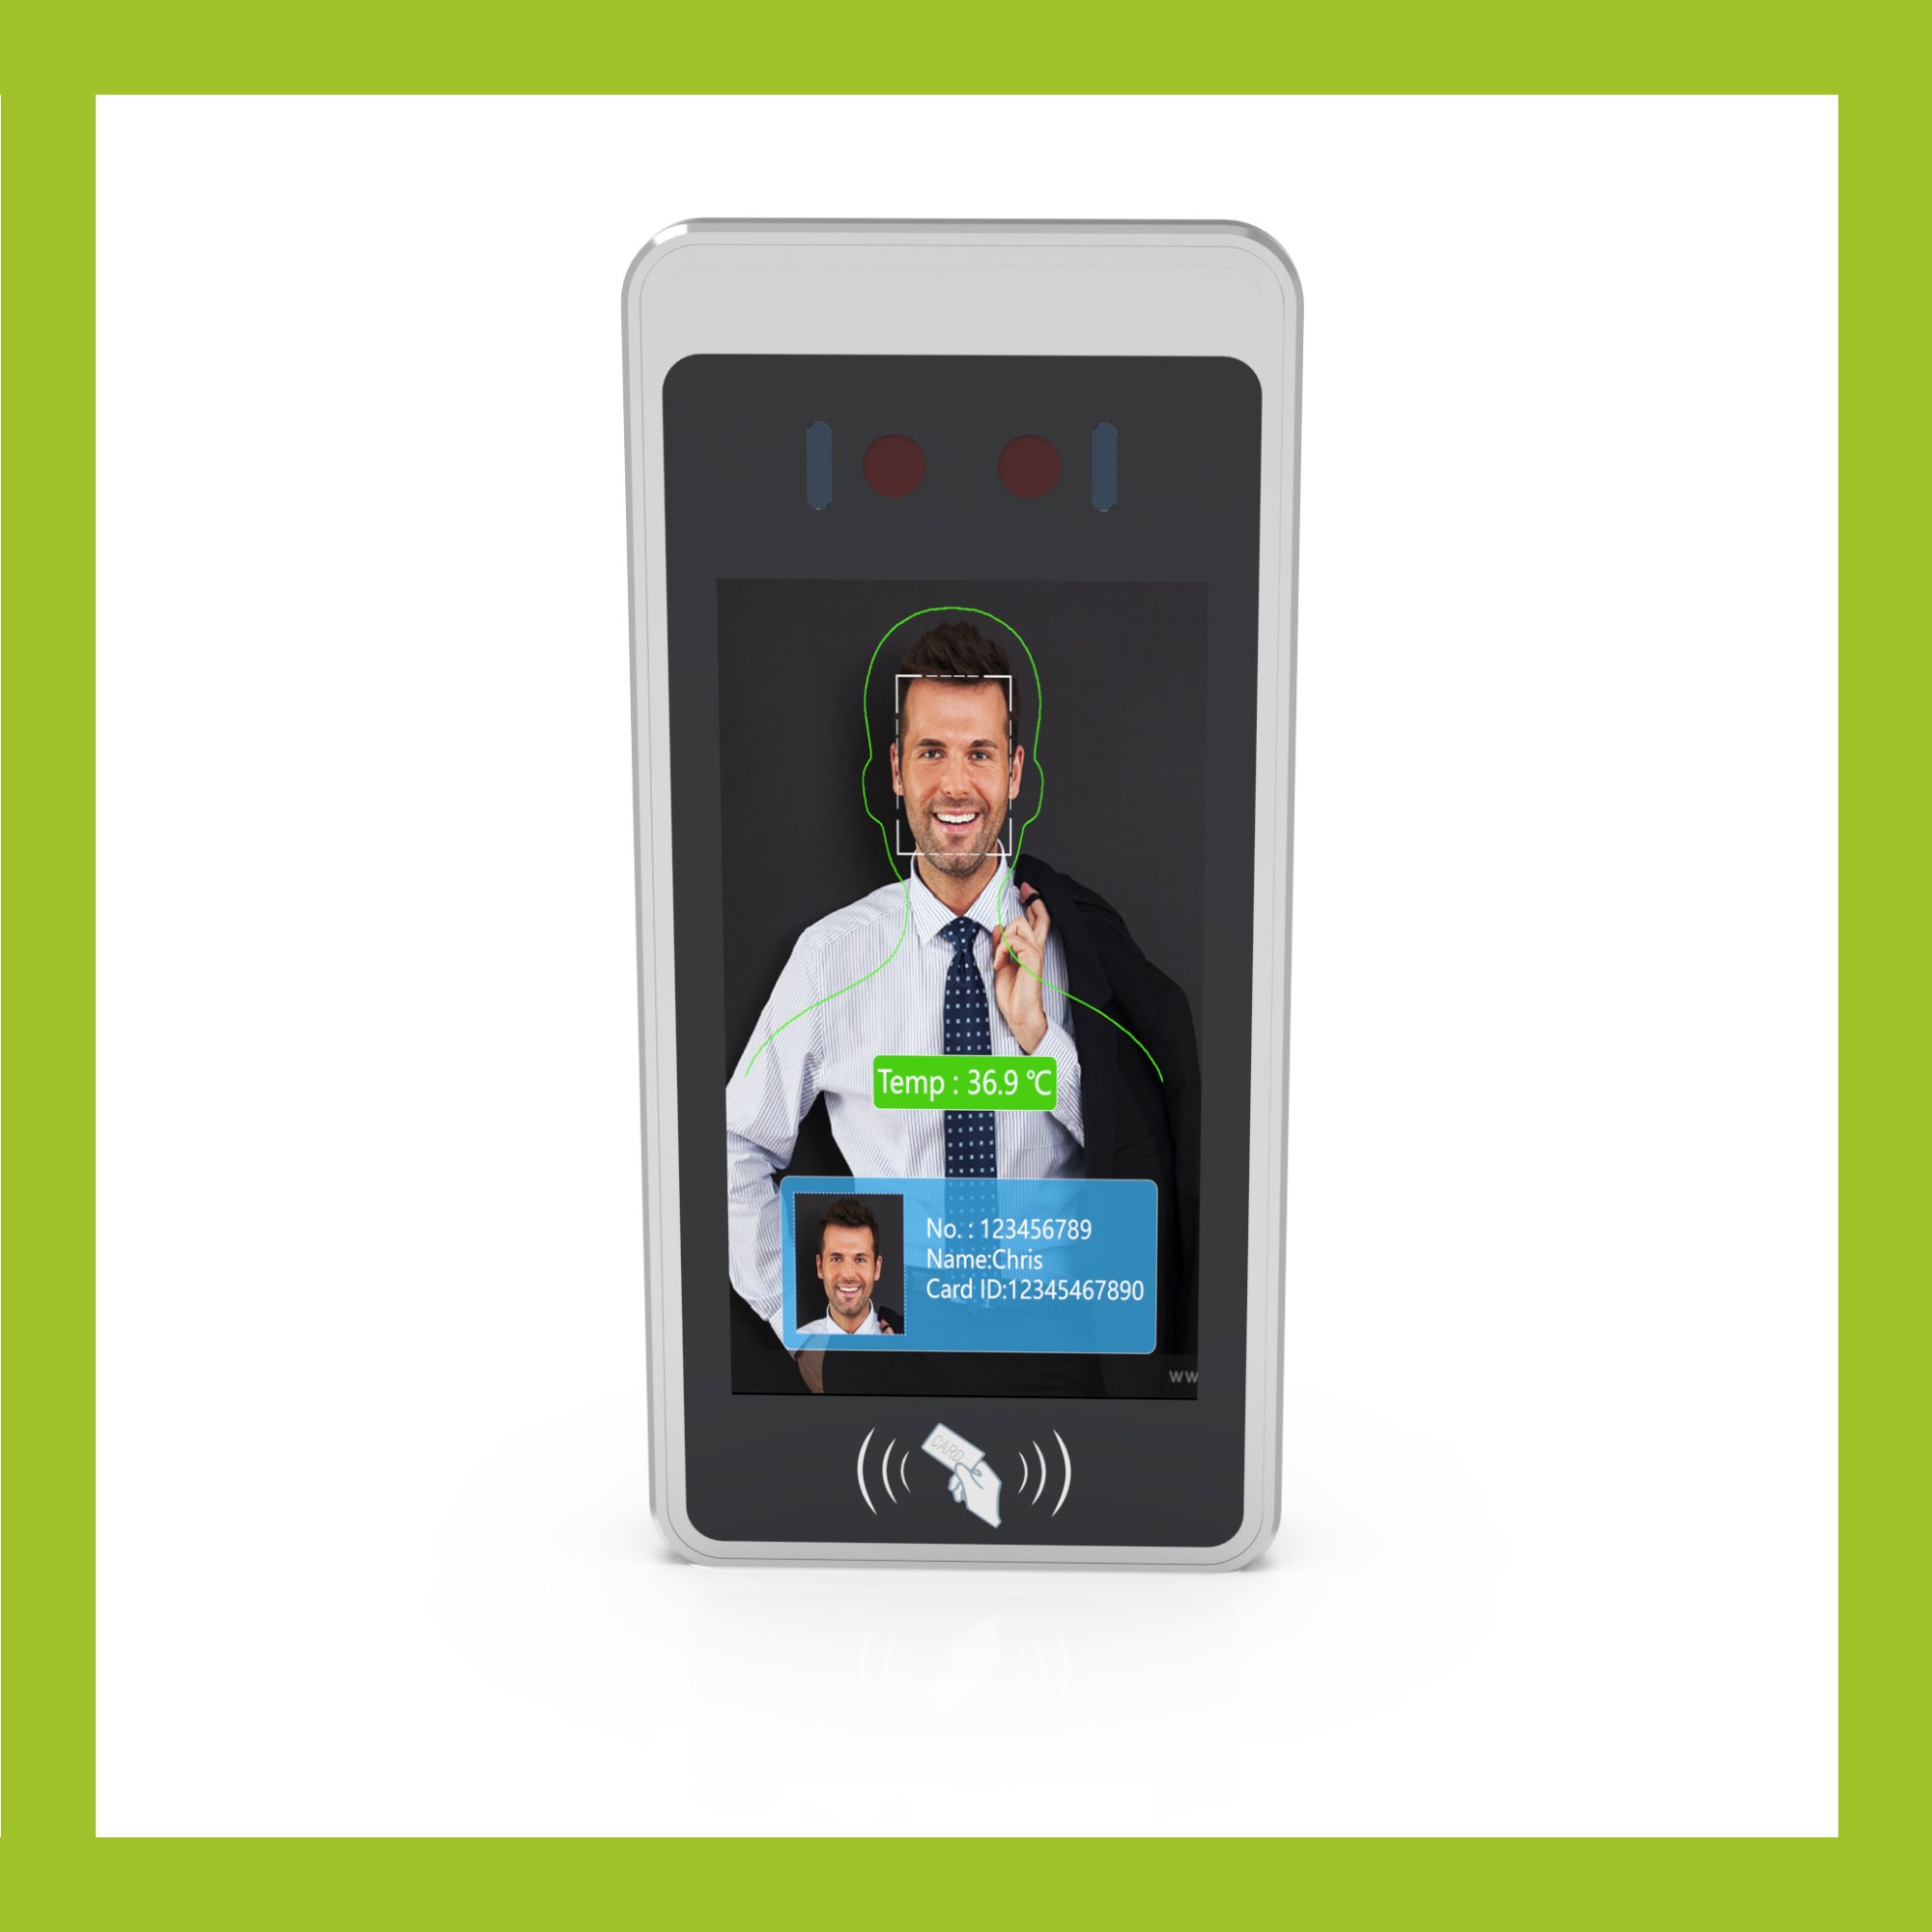 What are the advantages of facial recognition attendance machines and fingerprint attendance machines?